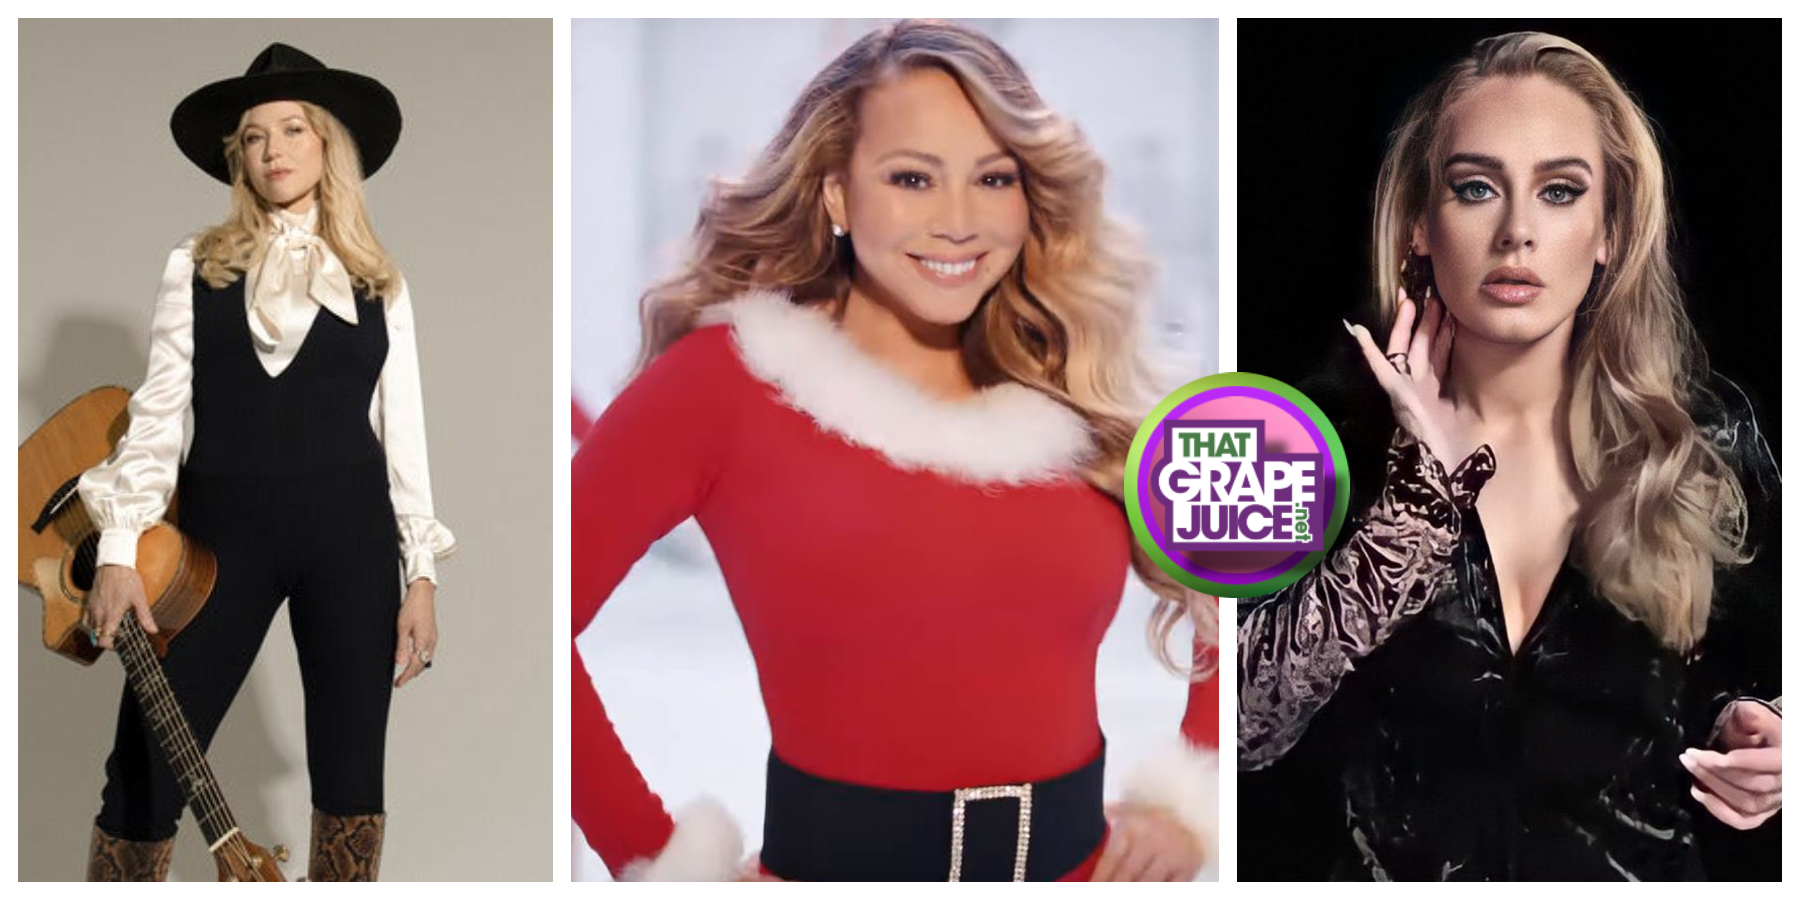 Chart Check: Mariah Carey’s ‘All I Want for Christmas’ Ties Adele’s ‘Rolling in the Deep’ For Second Longest-Charting Solo Female Song in Hot 100 History